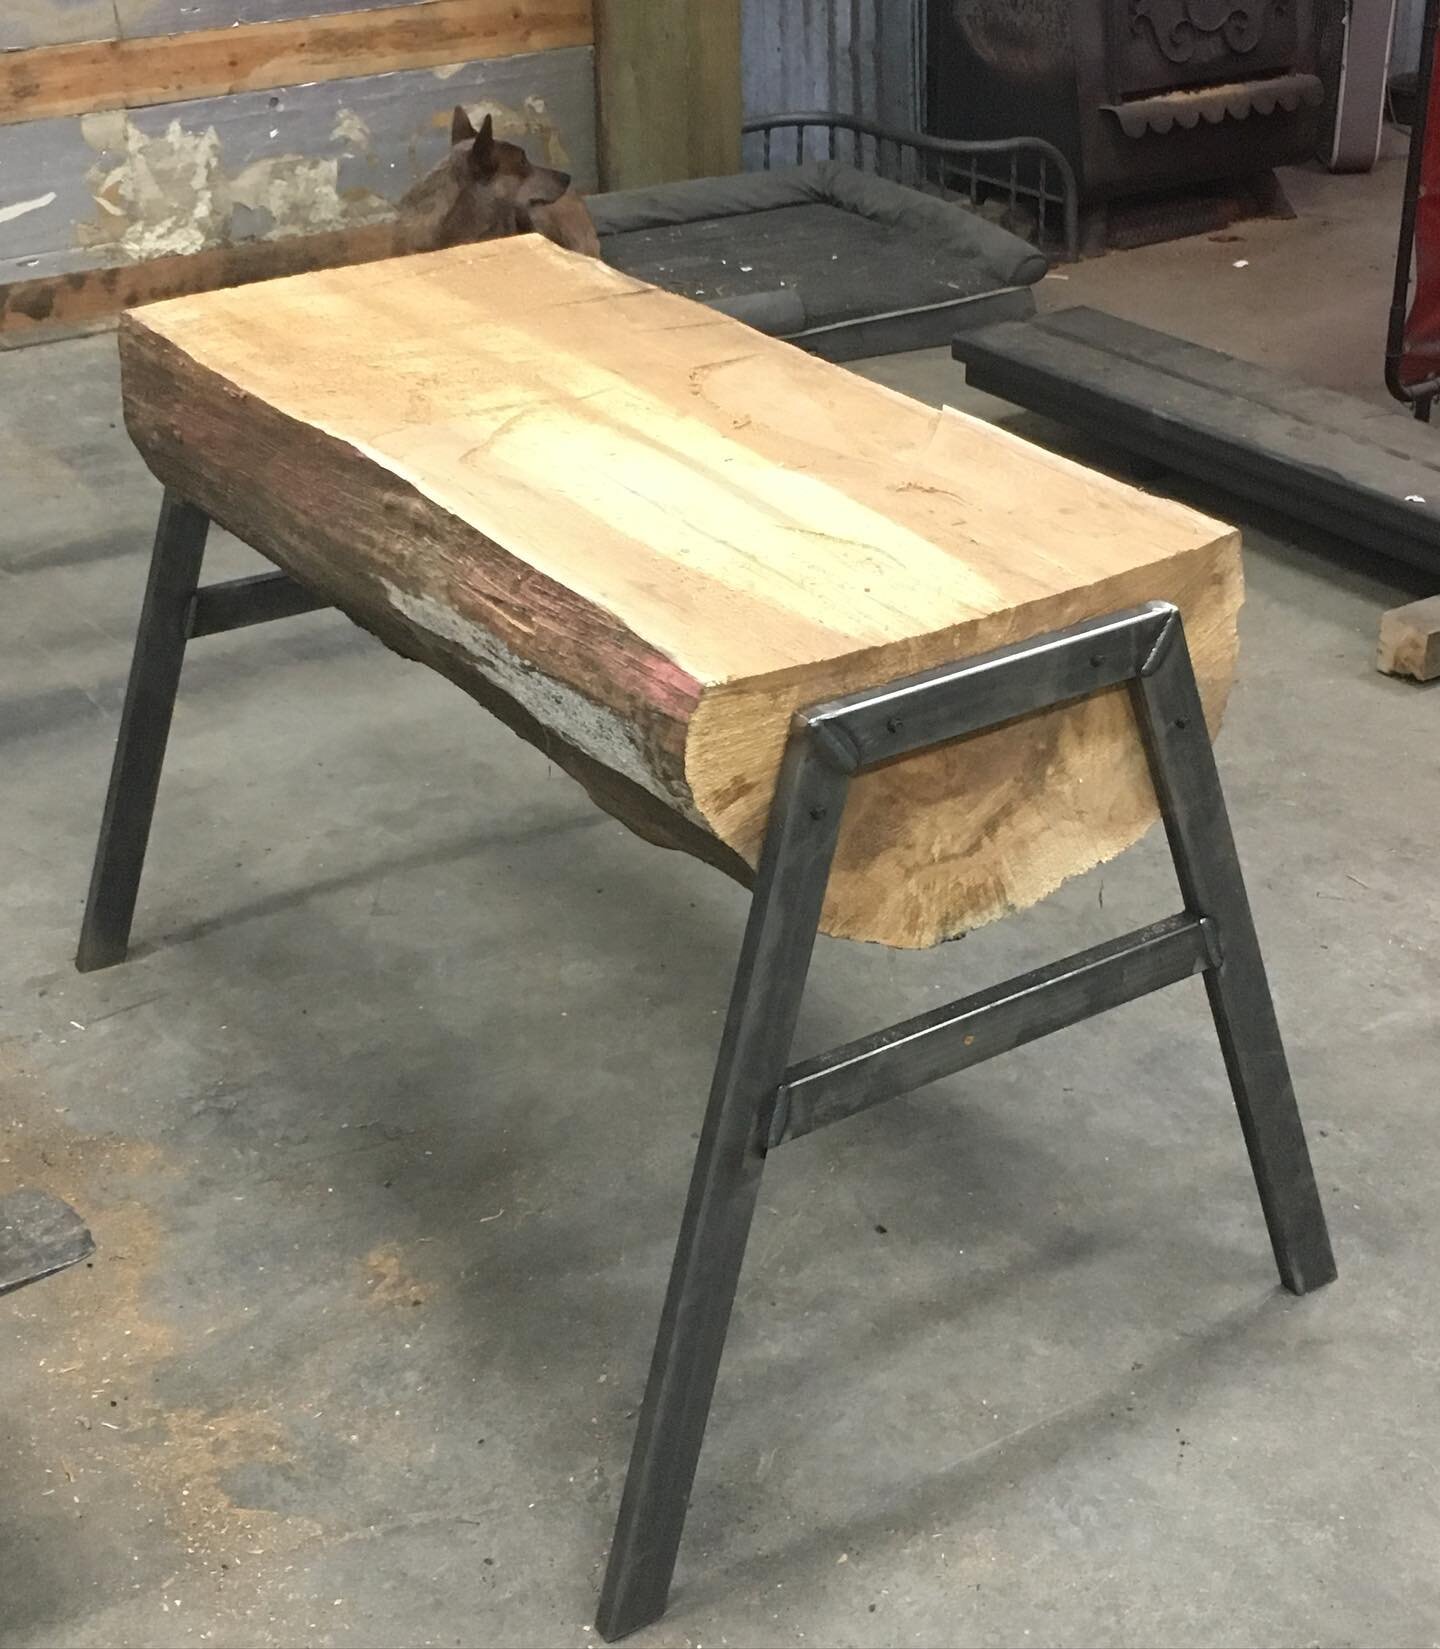 Any log has the potential to become a campsite table. #backyardcamping #campingtable #camping #woodentable #metalfabrication #whidbeyislandlife #whidbeyislandgrown #customtable #pnw